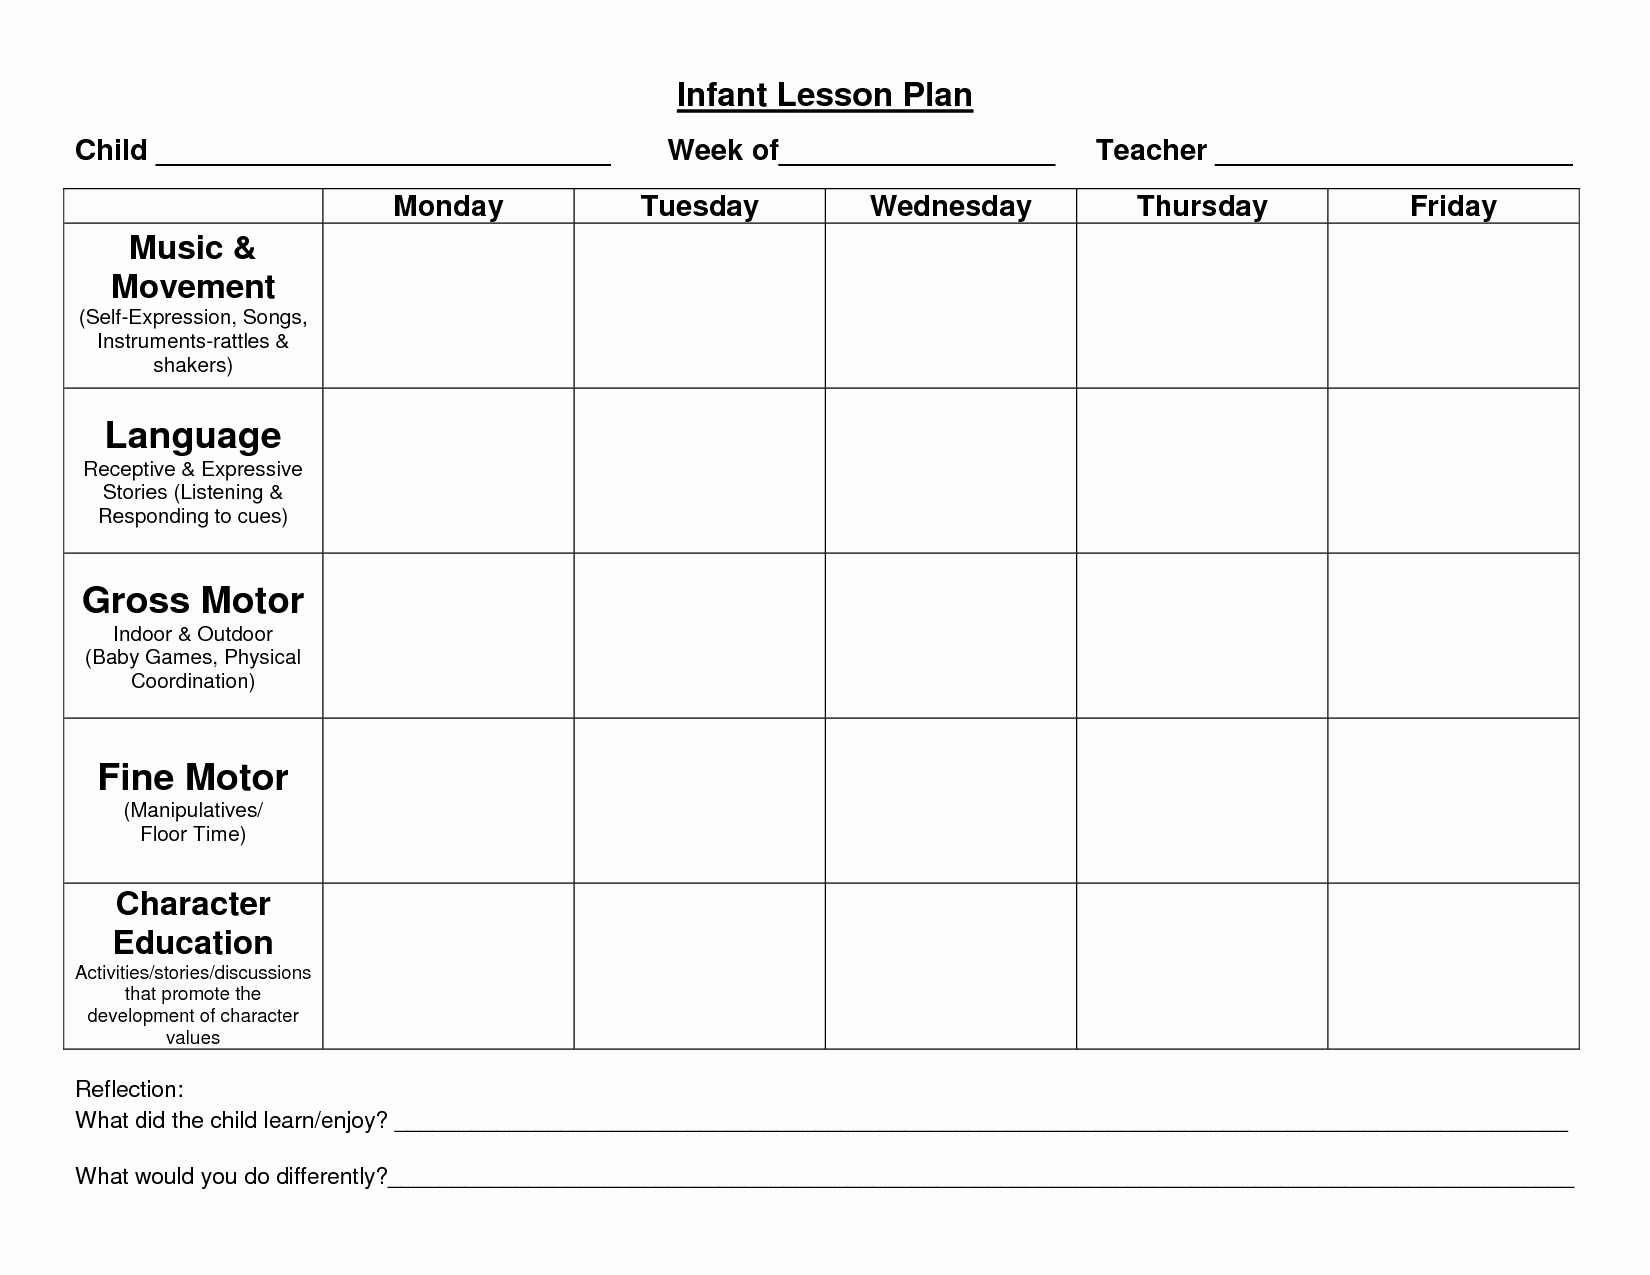 Lesson Plans for toddlers Template Beautiful Infant Blank Lesson Plan Sheets